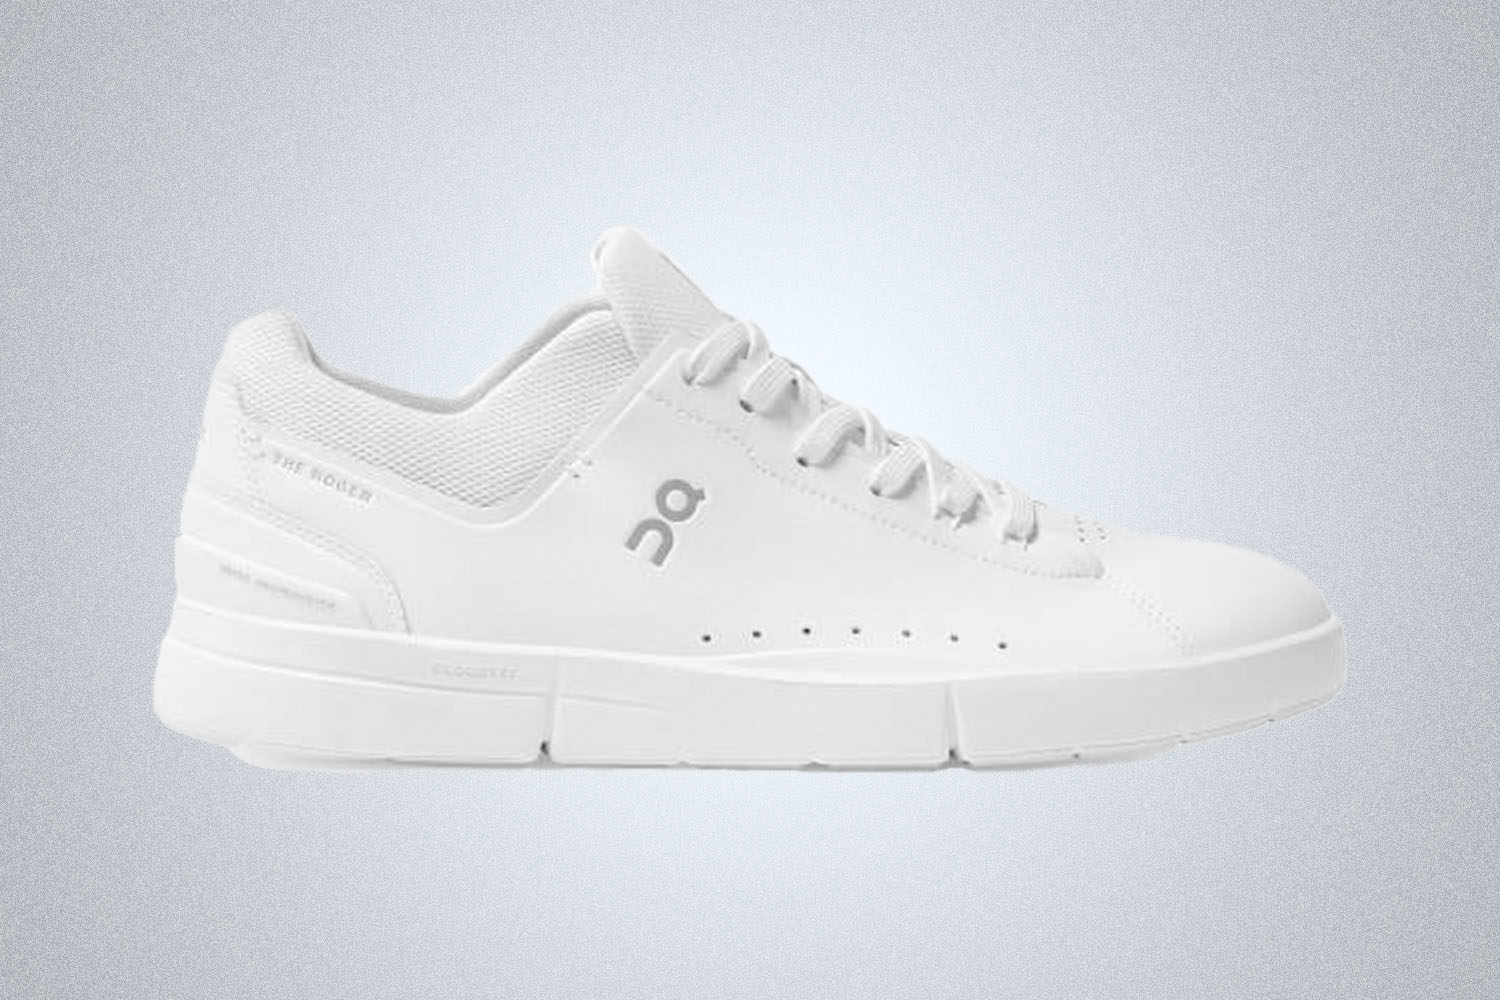 a white On tennis sneaker on a grey background